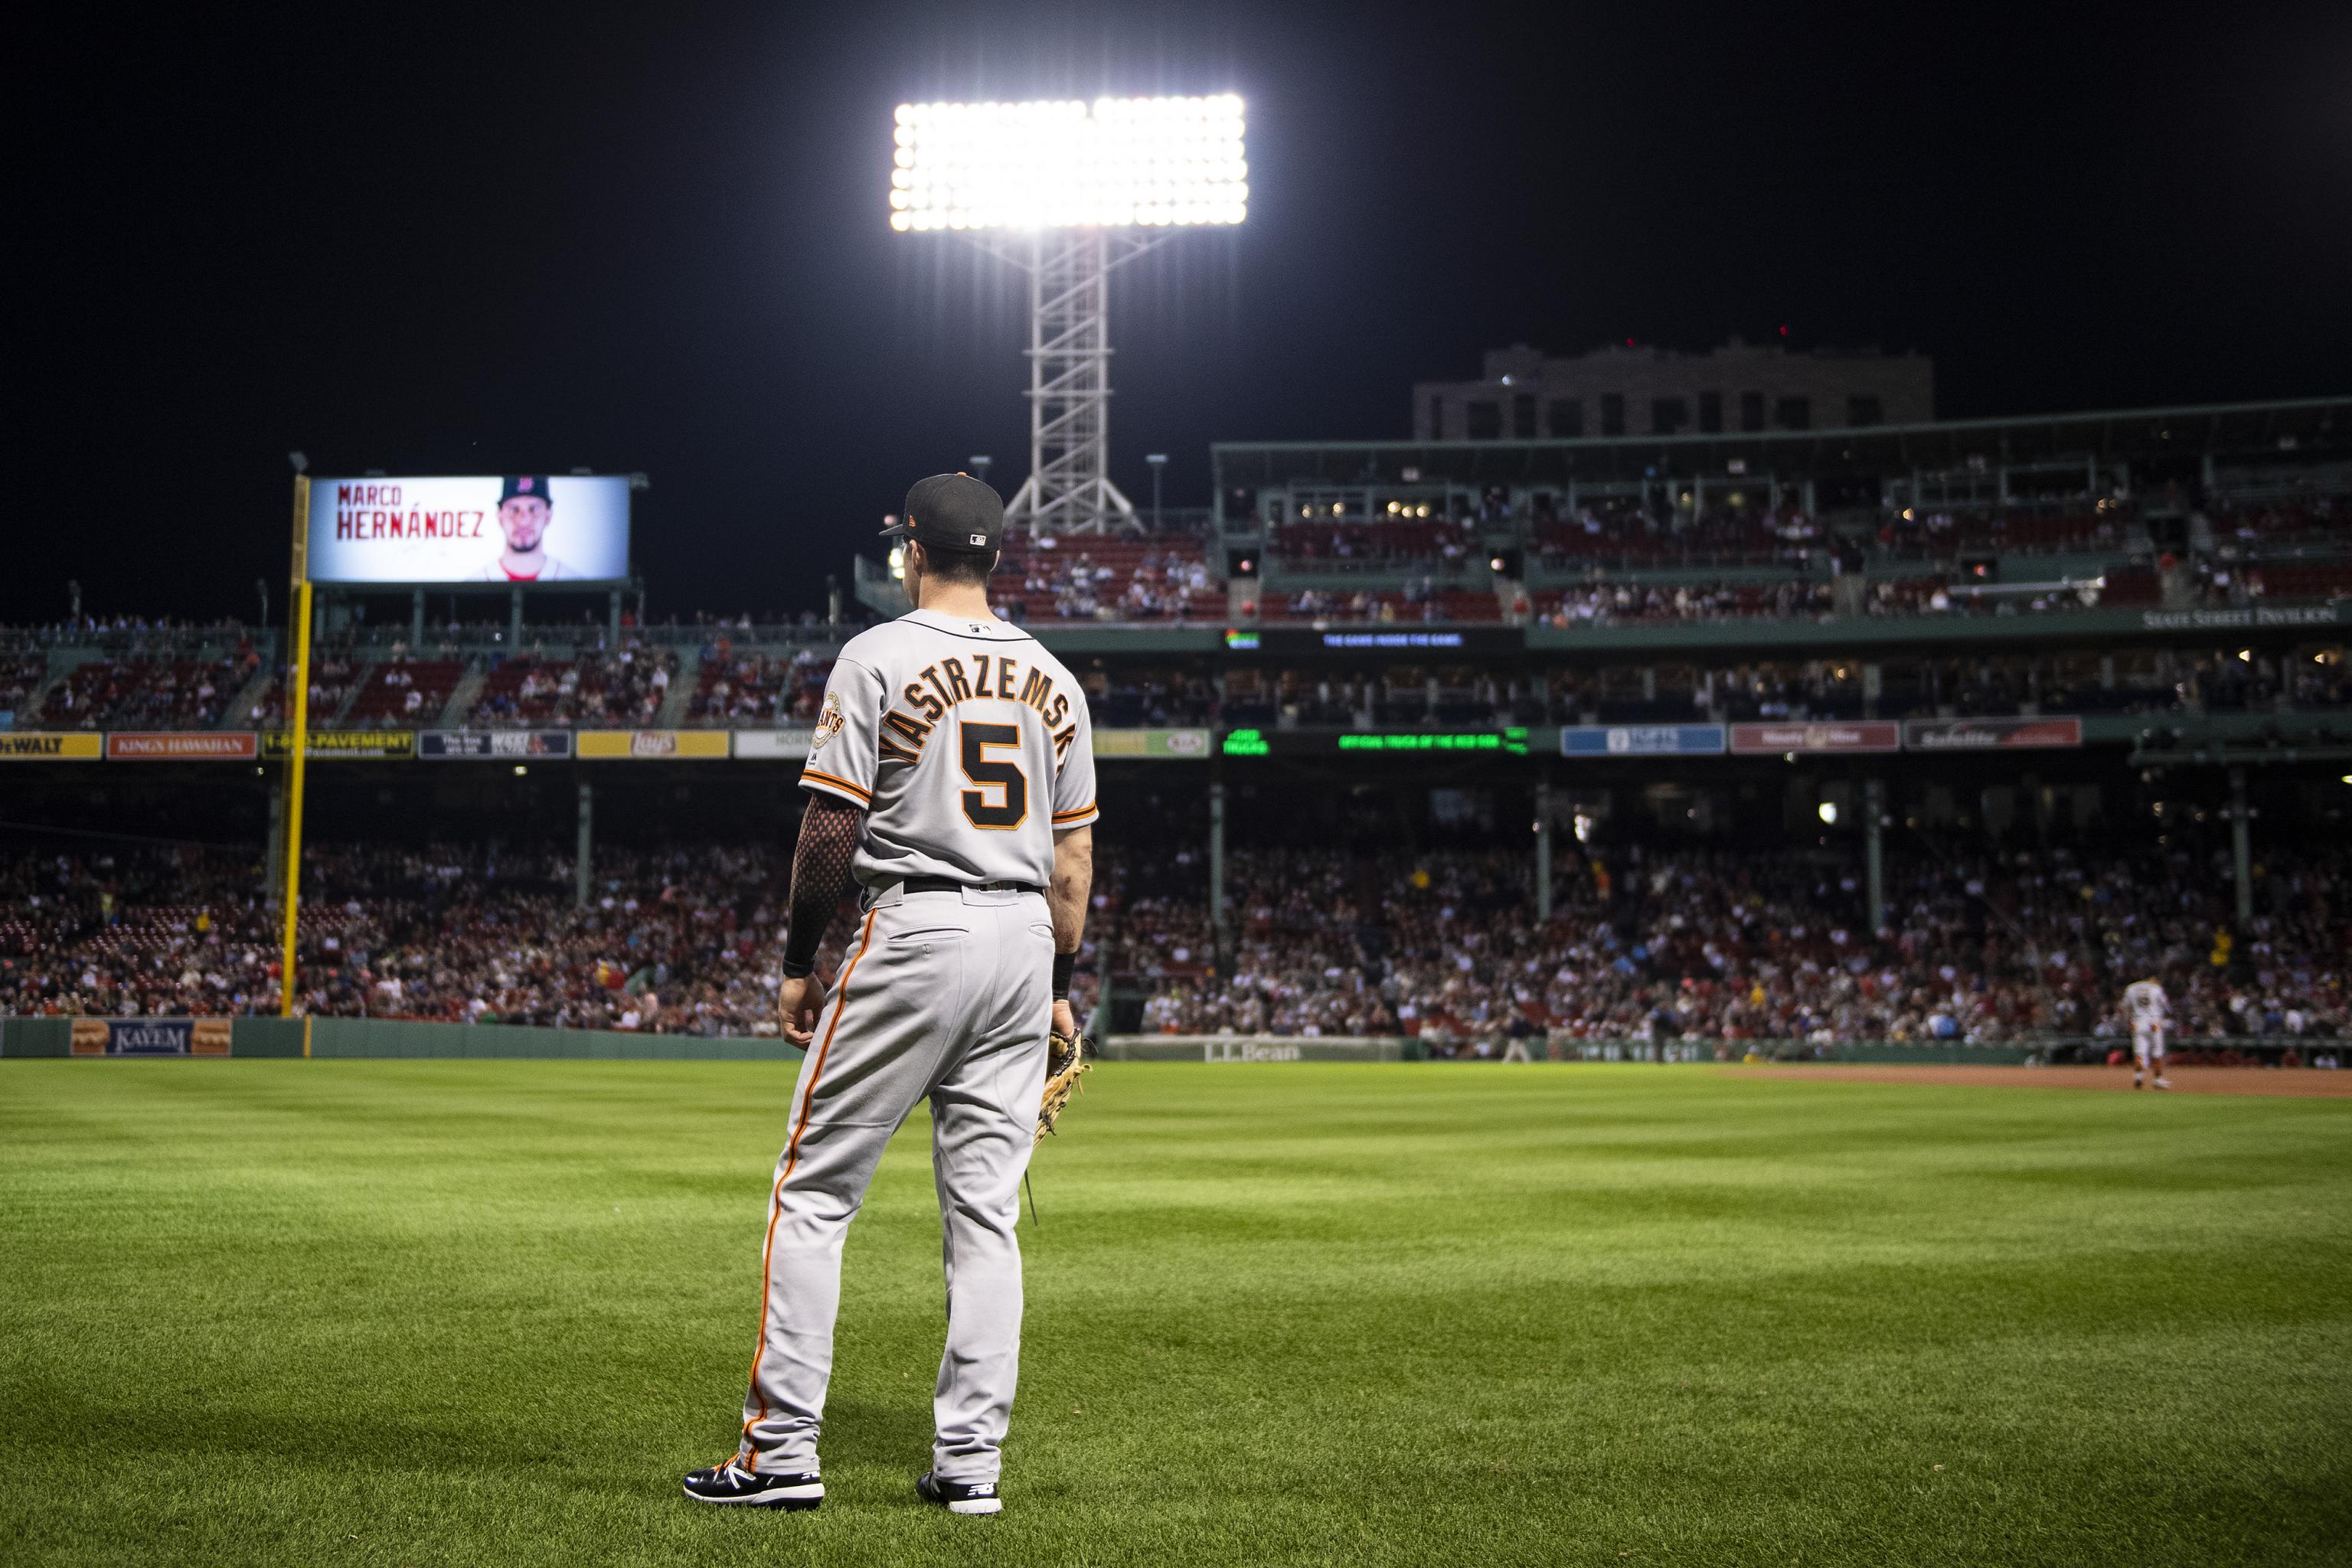 A legacy in left field: Giants OF Mike Yastrzemski visits with legendary  grandfather - Yaz - and homers in fairytale trip to Fenway Park